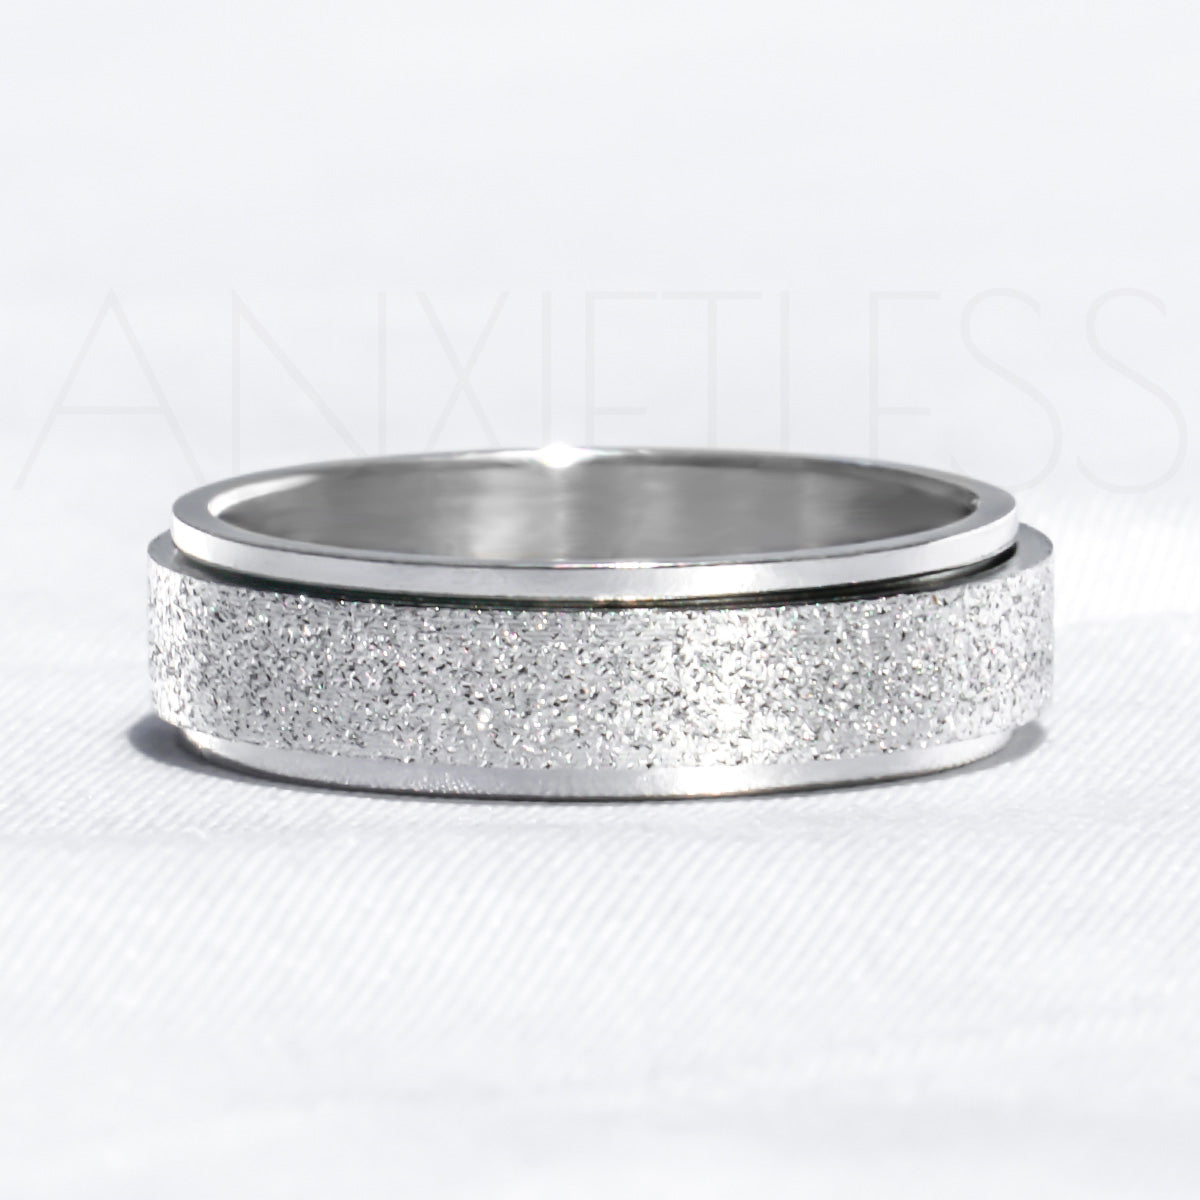 Sparkly Silver Anxiety Ring Laid Flat on White Background